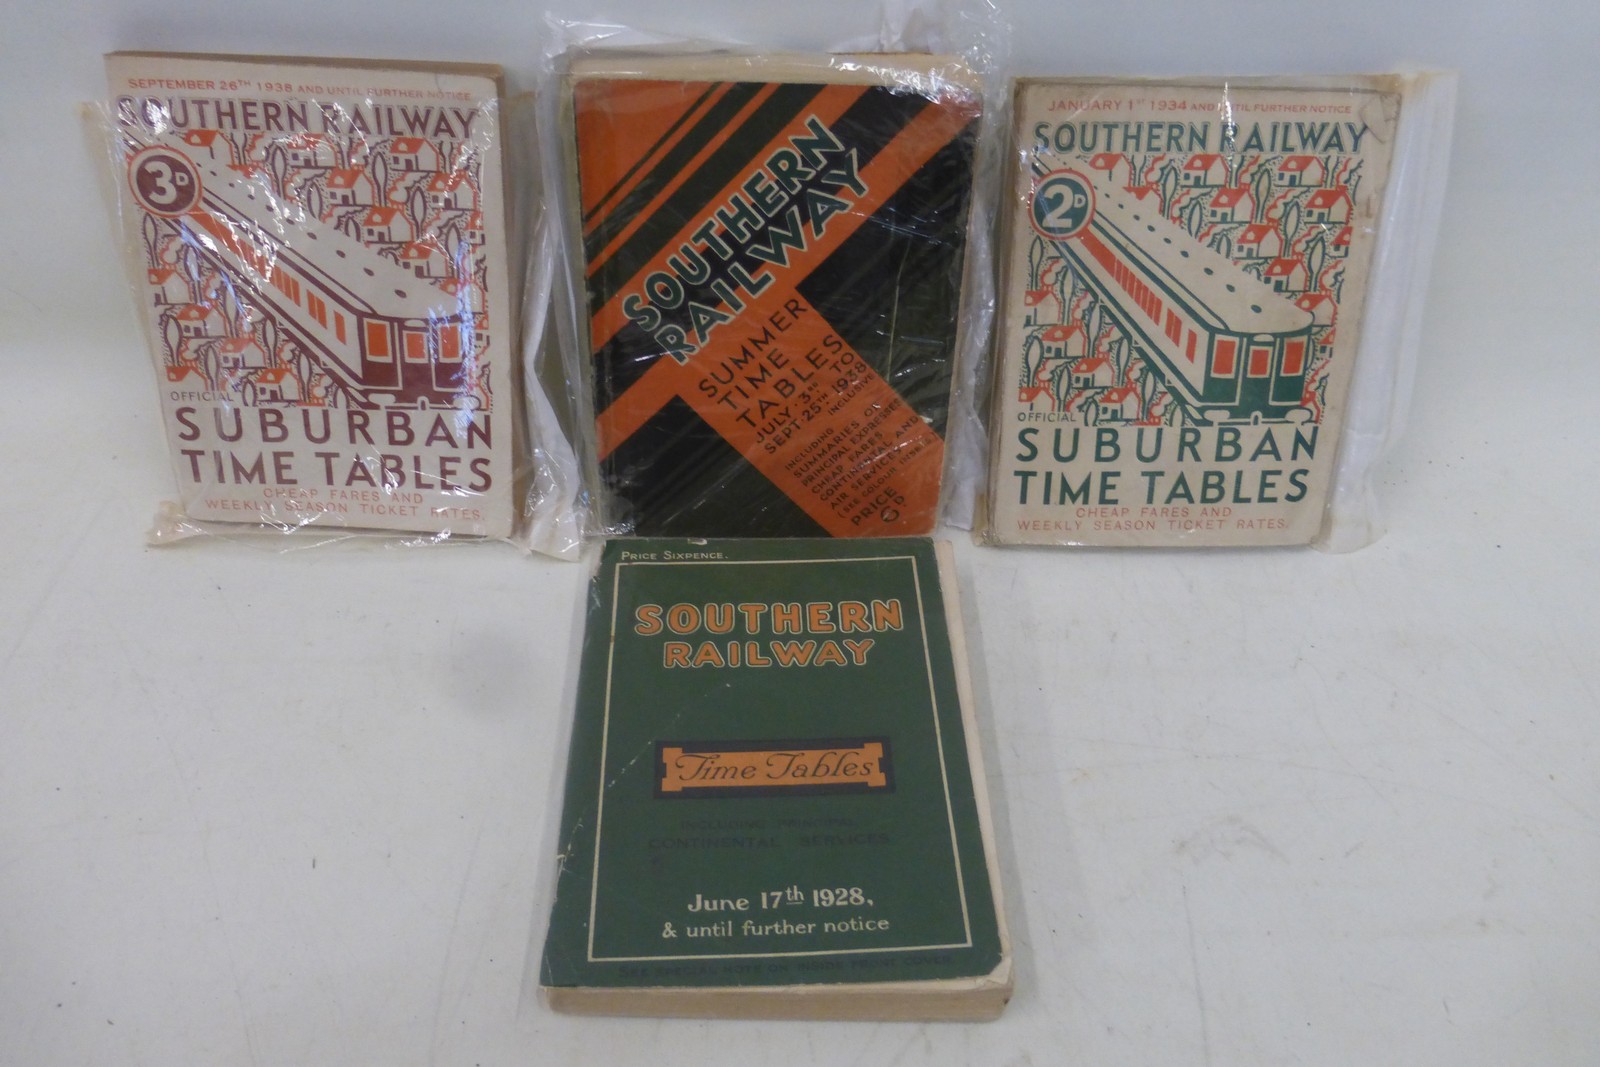 Four Southern Railway Time Tables, June 17th 1928 and three from the 1930s.